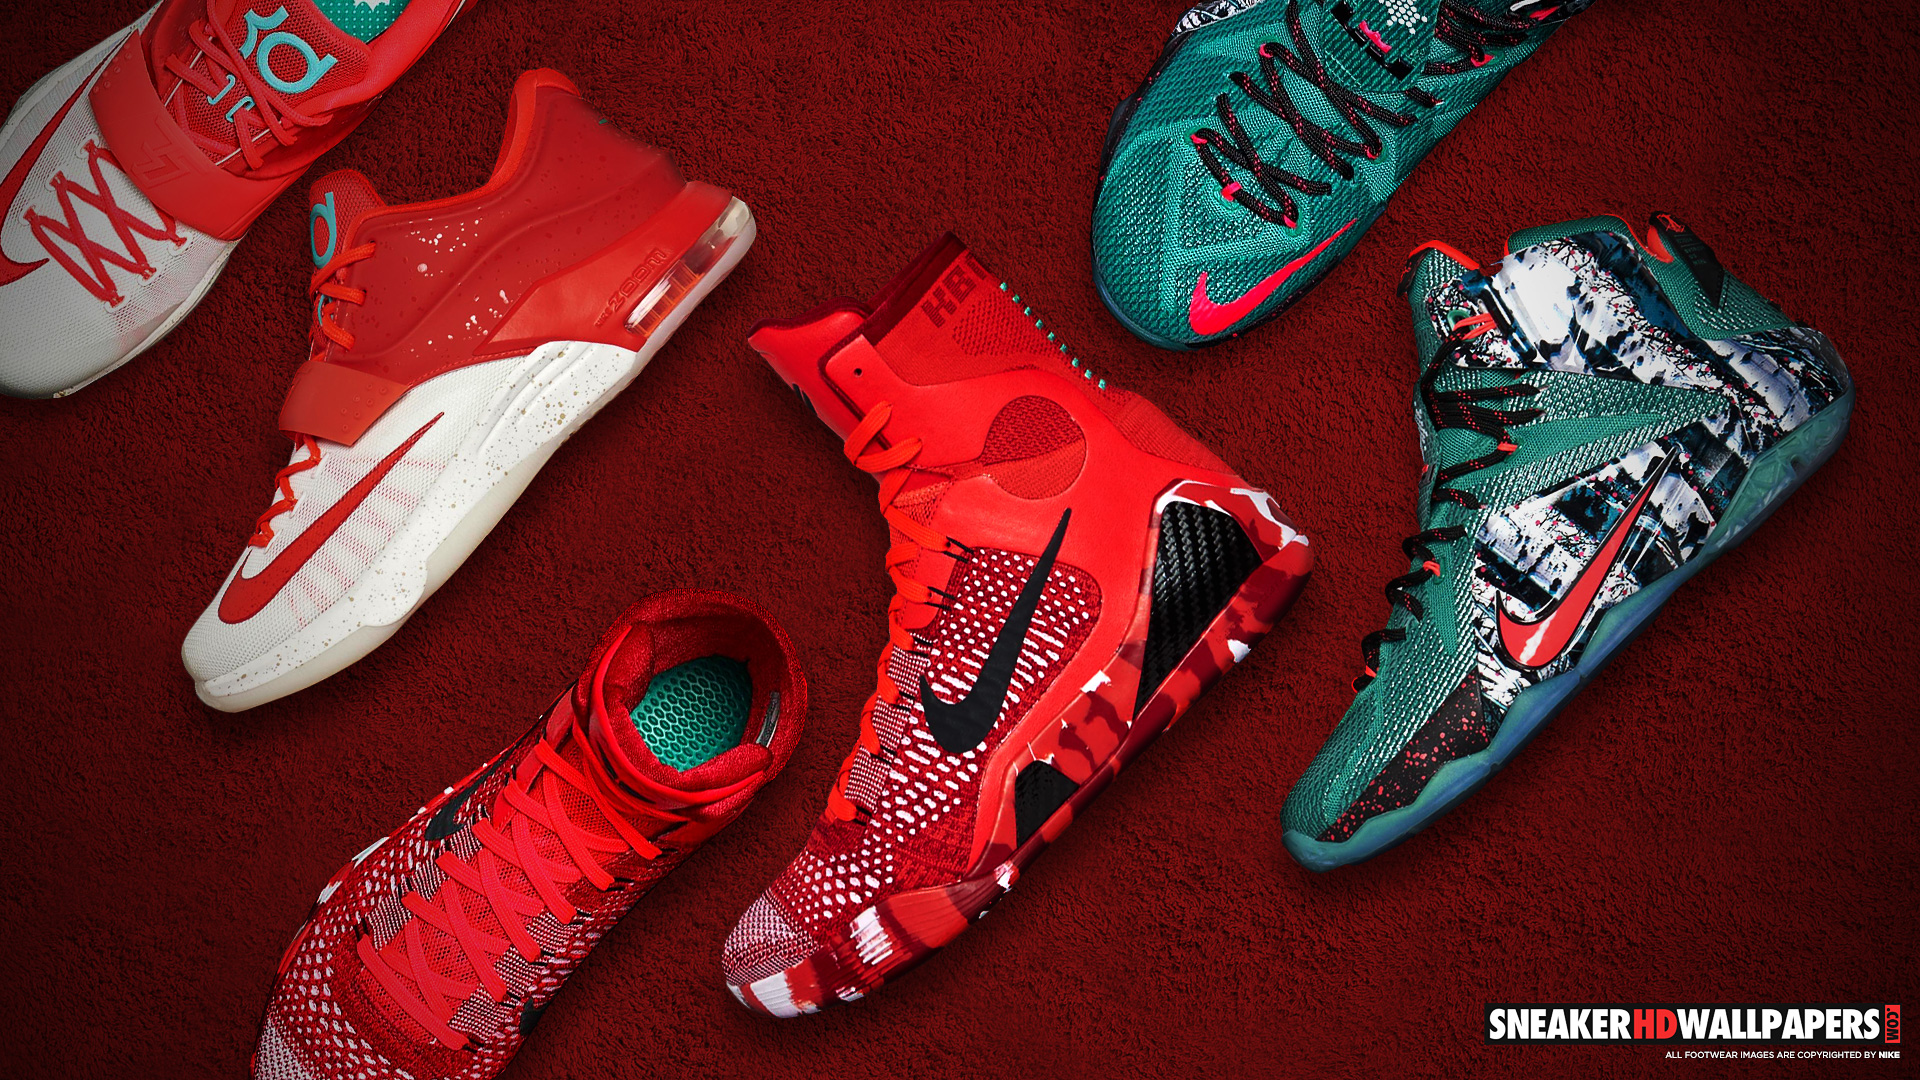  – Your favorite sneakers in 4K, Retina, Mobile and  HD wallpaper resolutions! » Blog Archive Nike Basketball Christmas 2014  wallpaper!  - Your favorite sneakers in 4K,  Retina, Mobile and